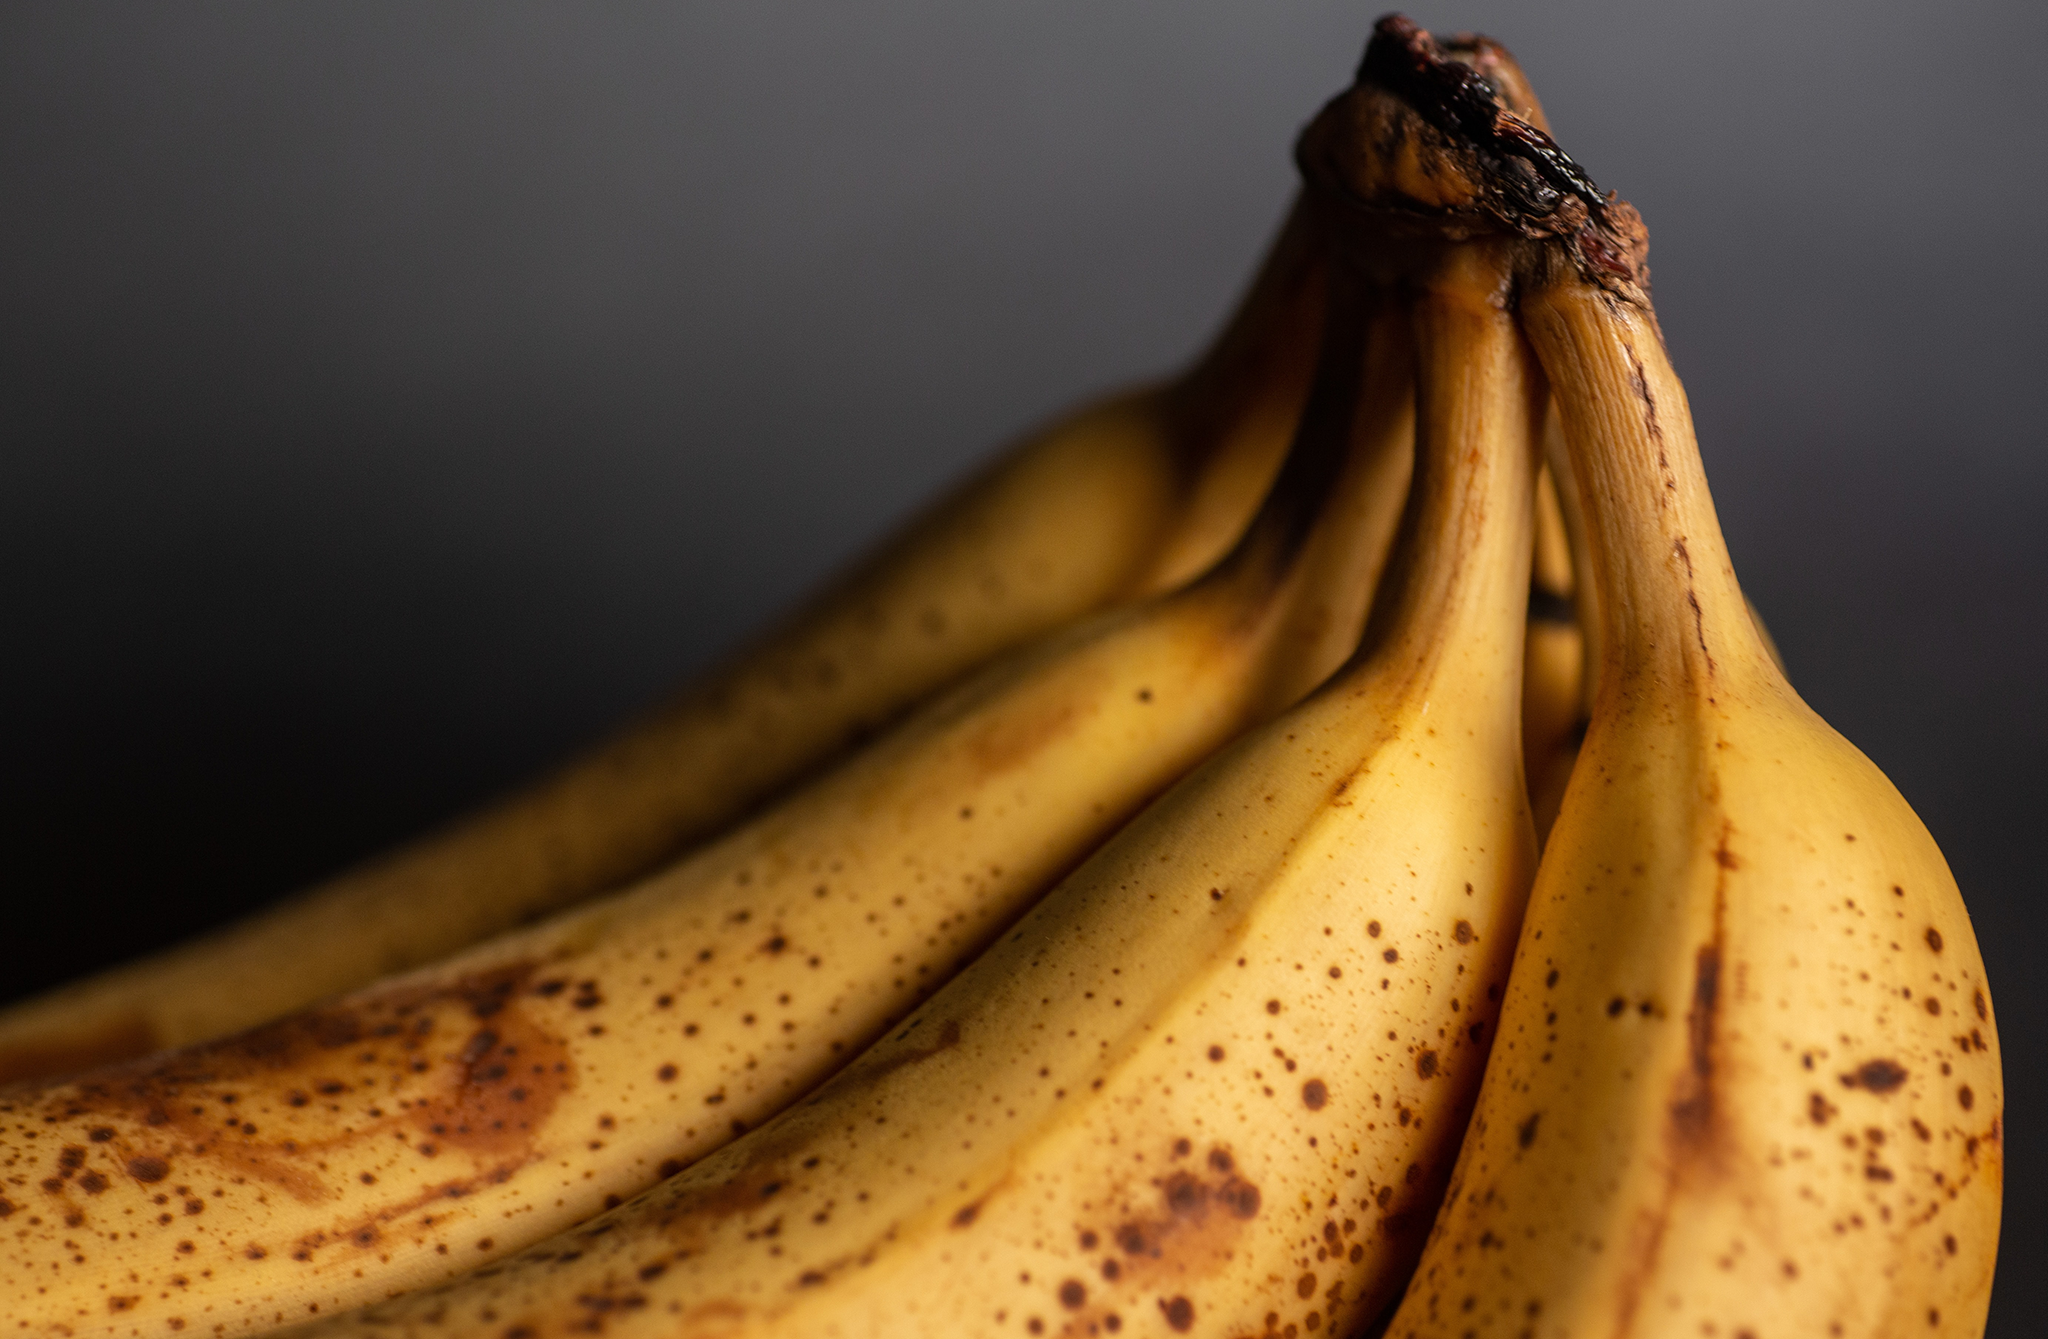 A bunch of bananas on a black background